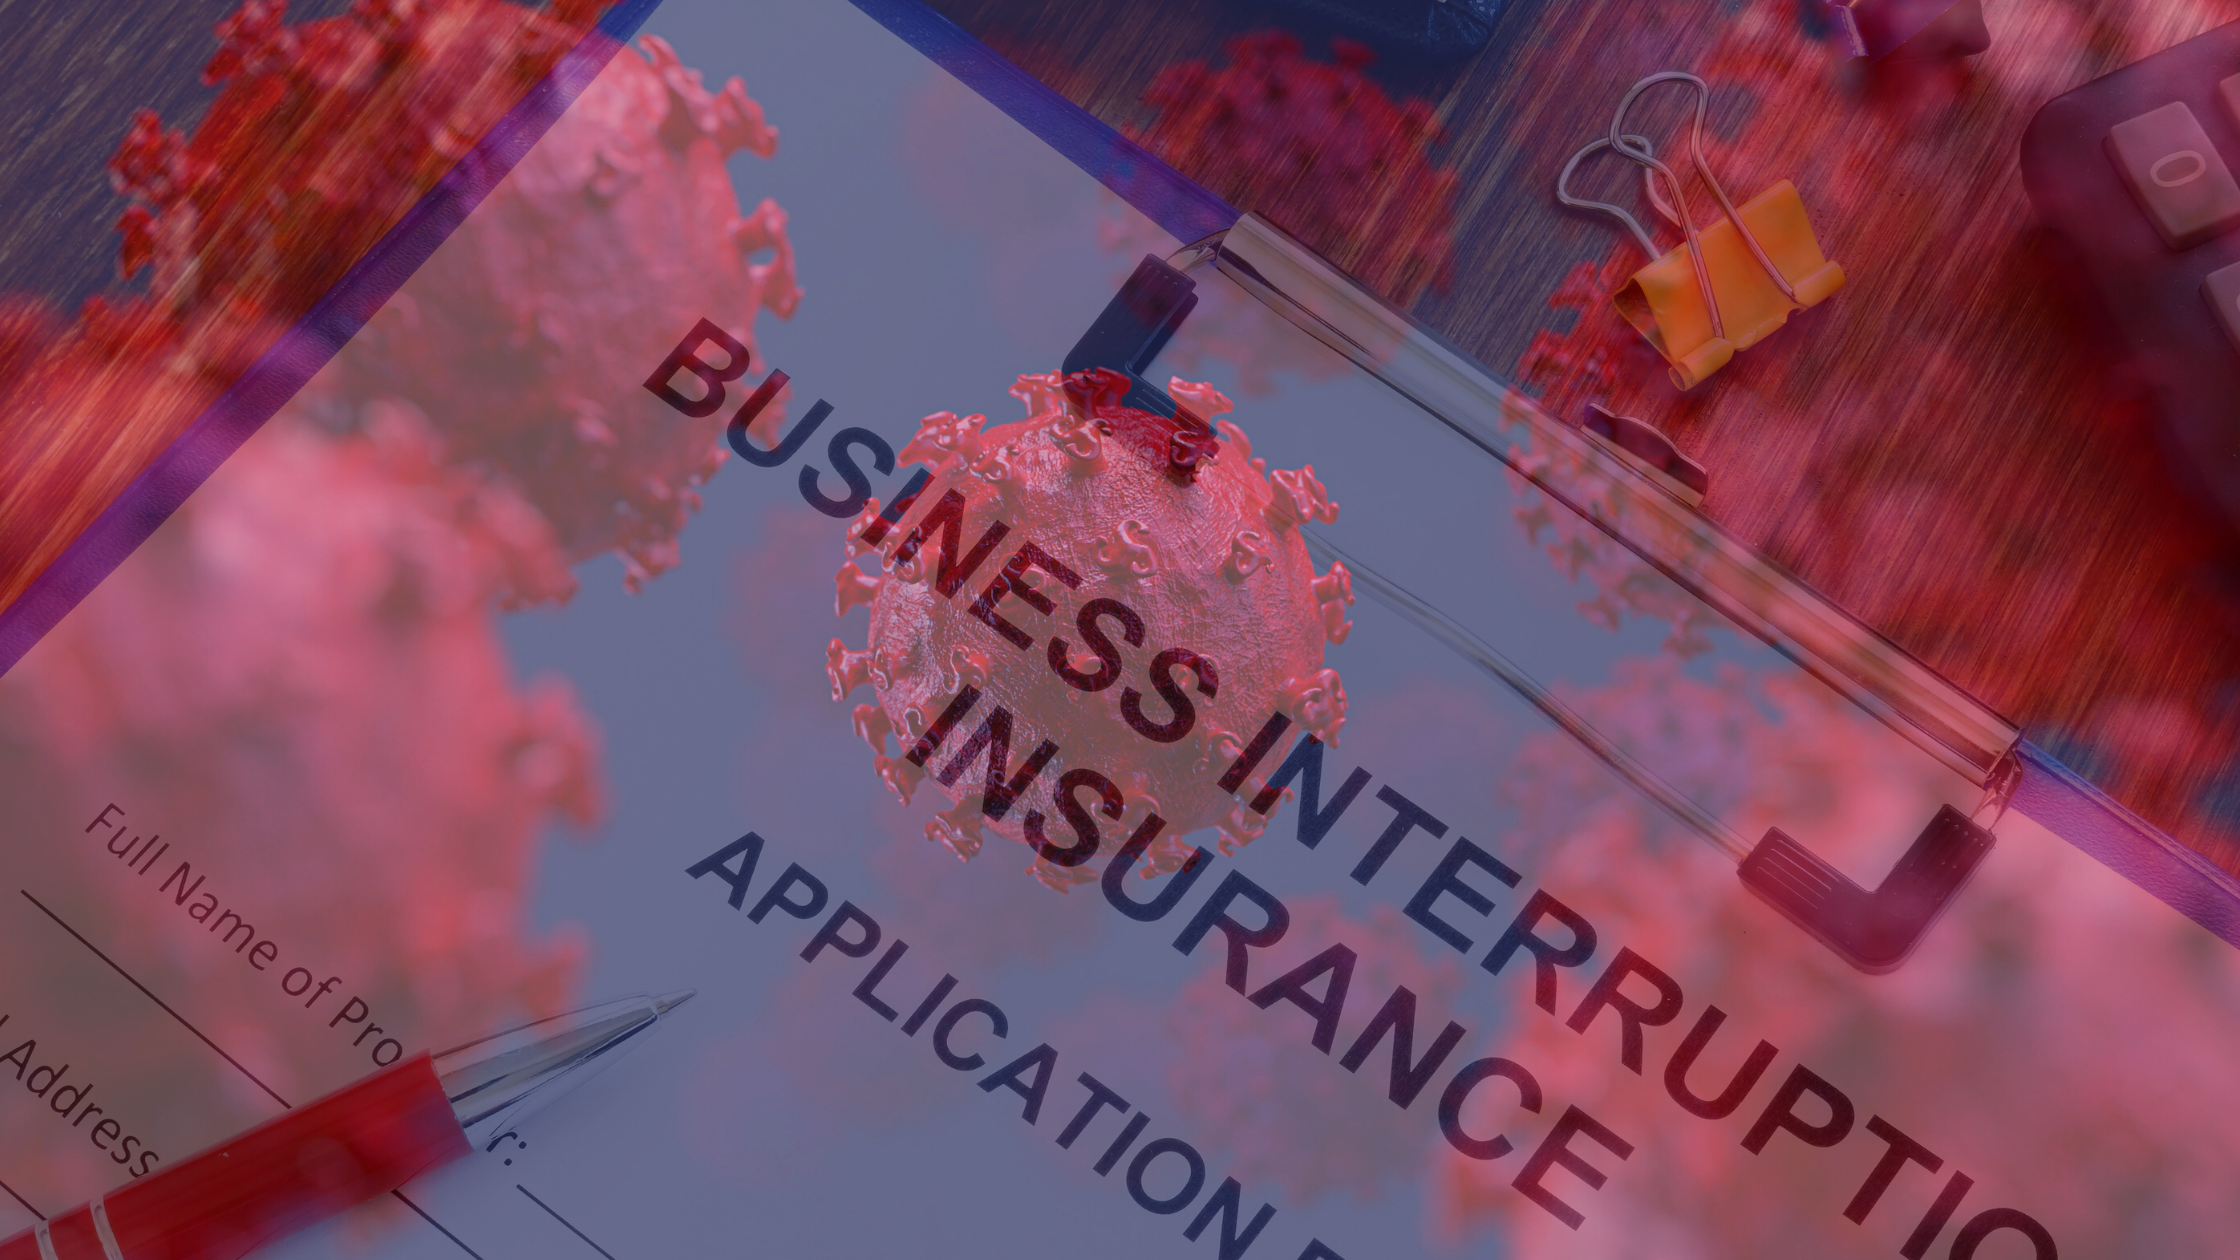 Image of Business Interruption Insurance form with covid virus overlay